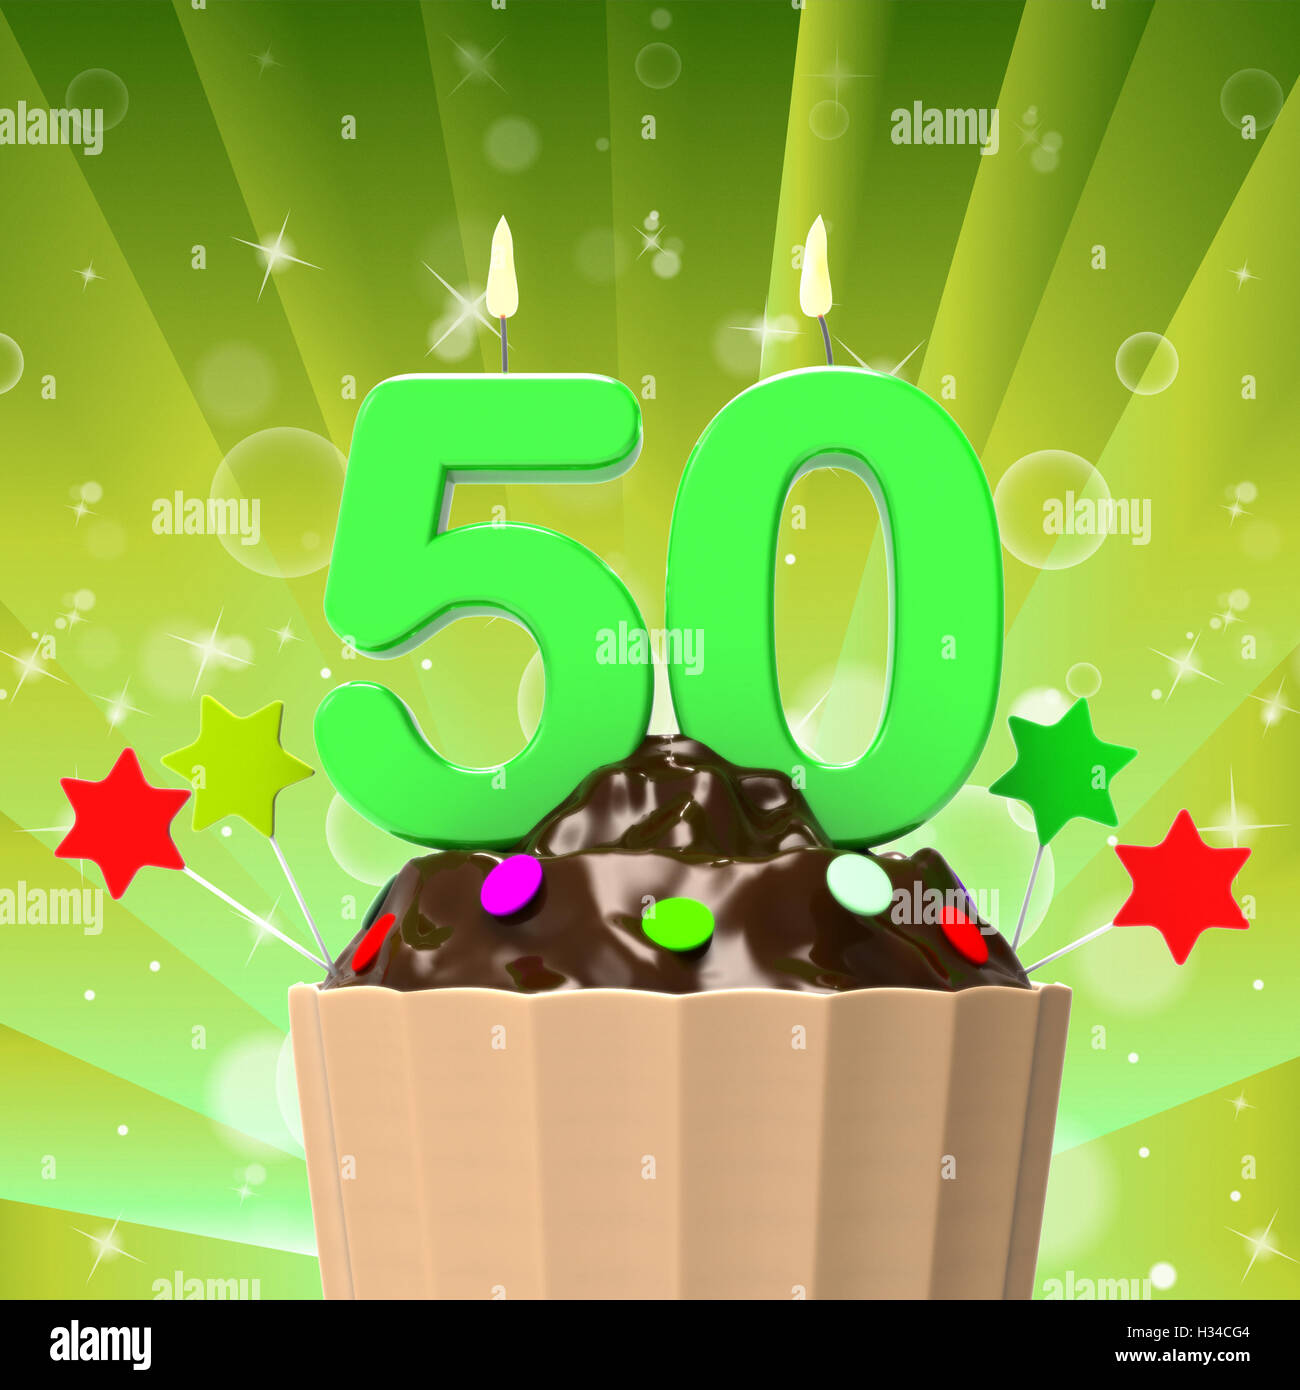 Fifty Candle On Cupcake Shows Fiftieth Anniversary Or Remembranc Stock Photo